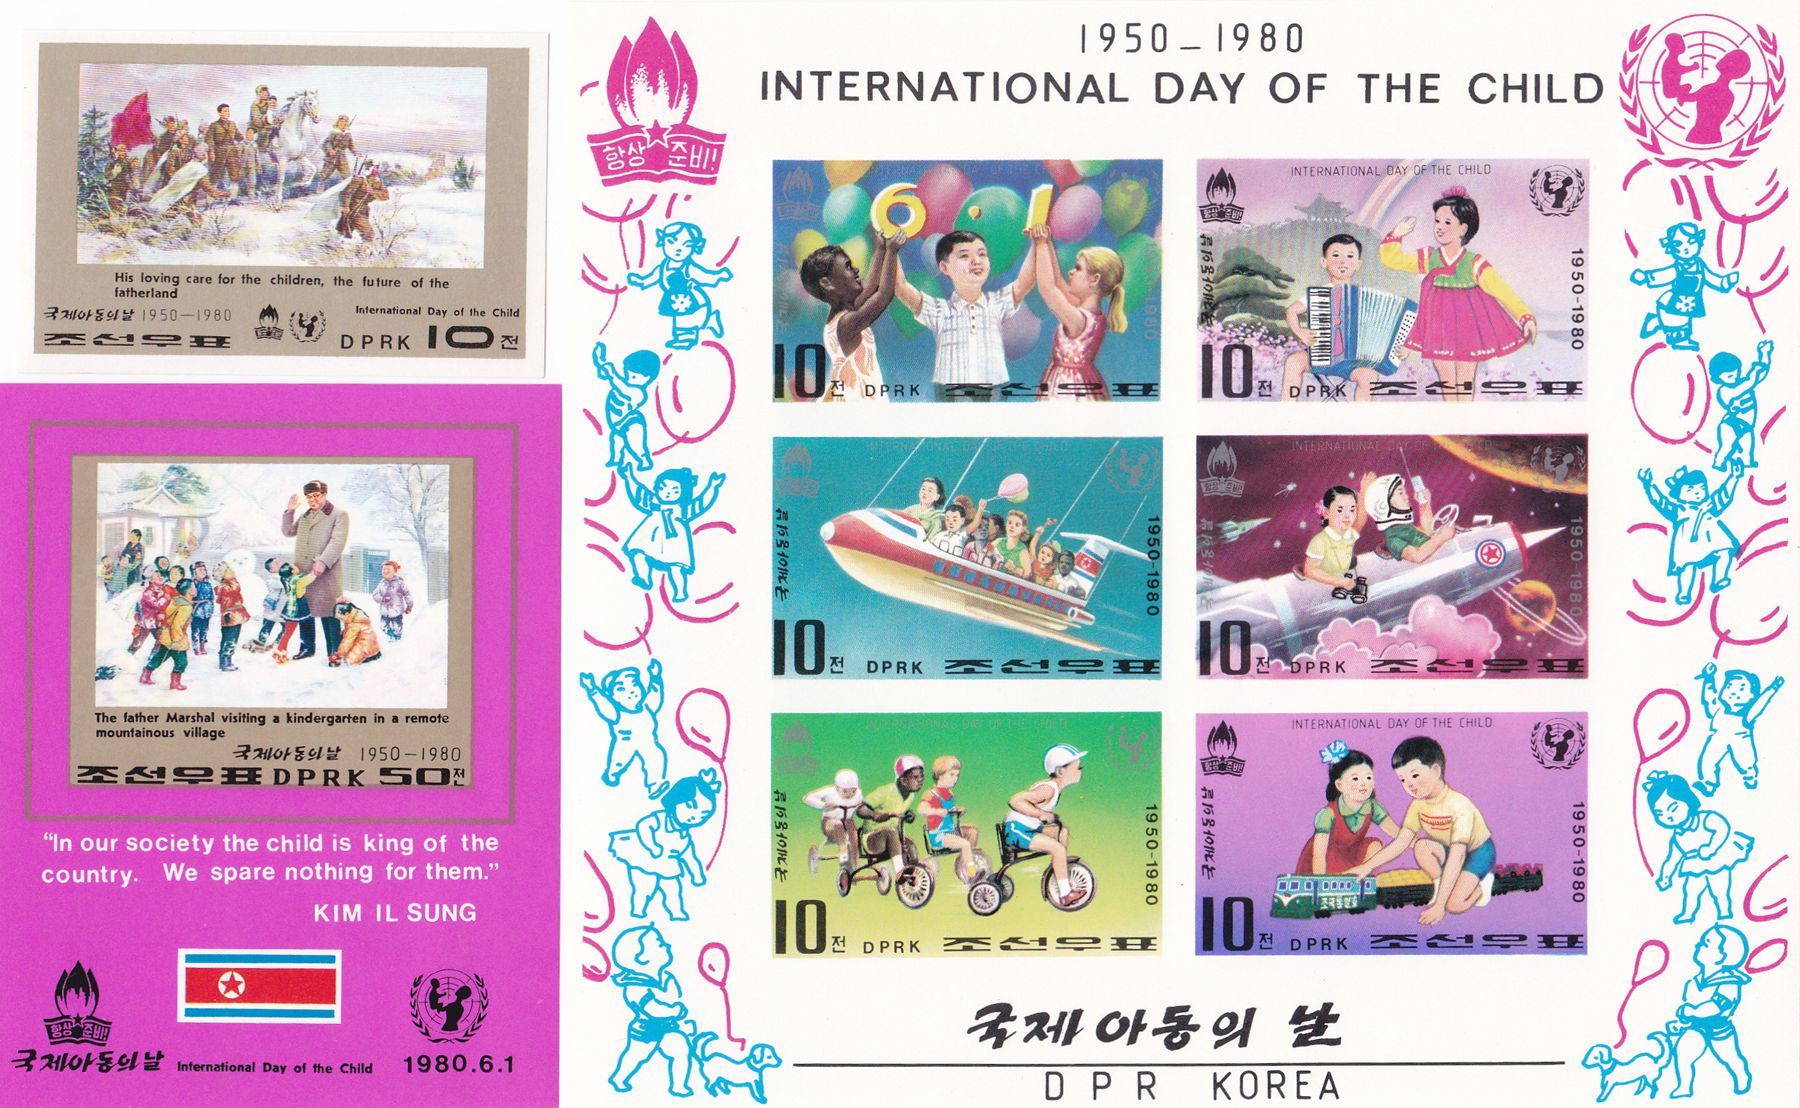 L4678, Korea "1980 International Day of the Child", Full 3 pcs Stamp, Imperforate